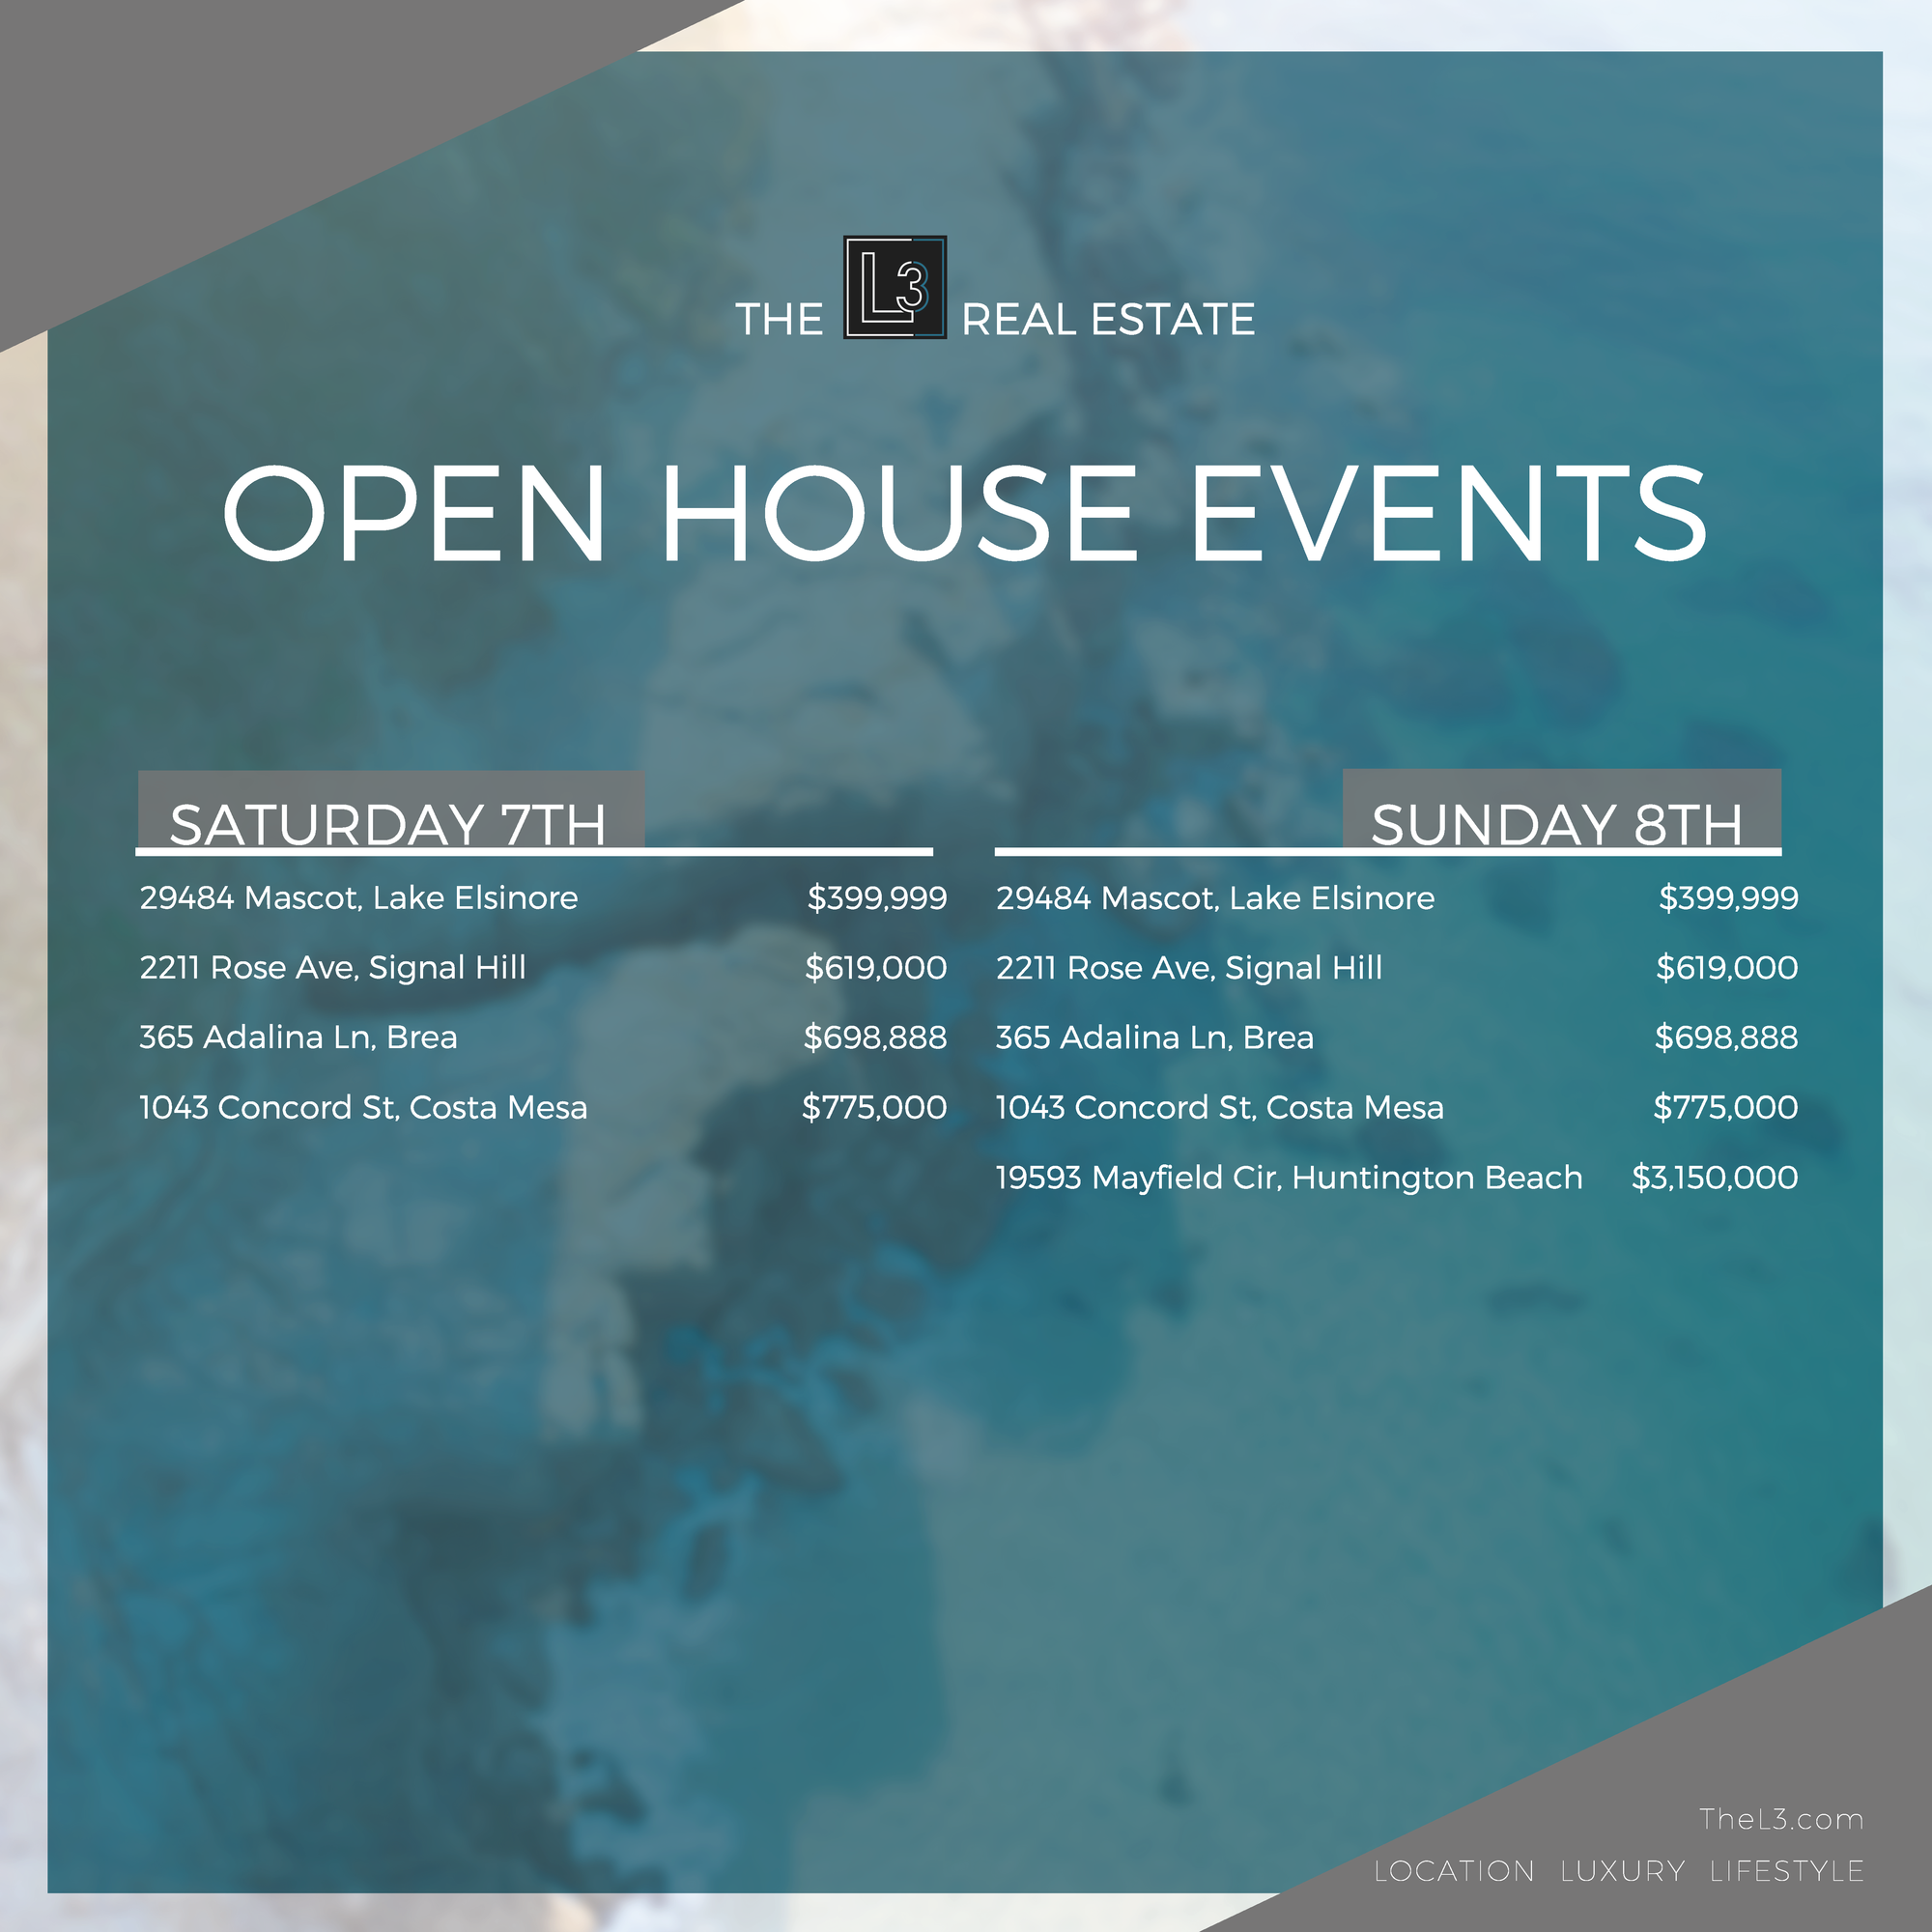 The L3 Real Estate Open House Events